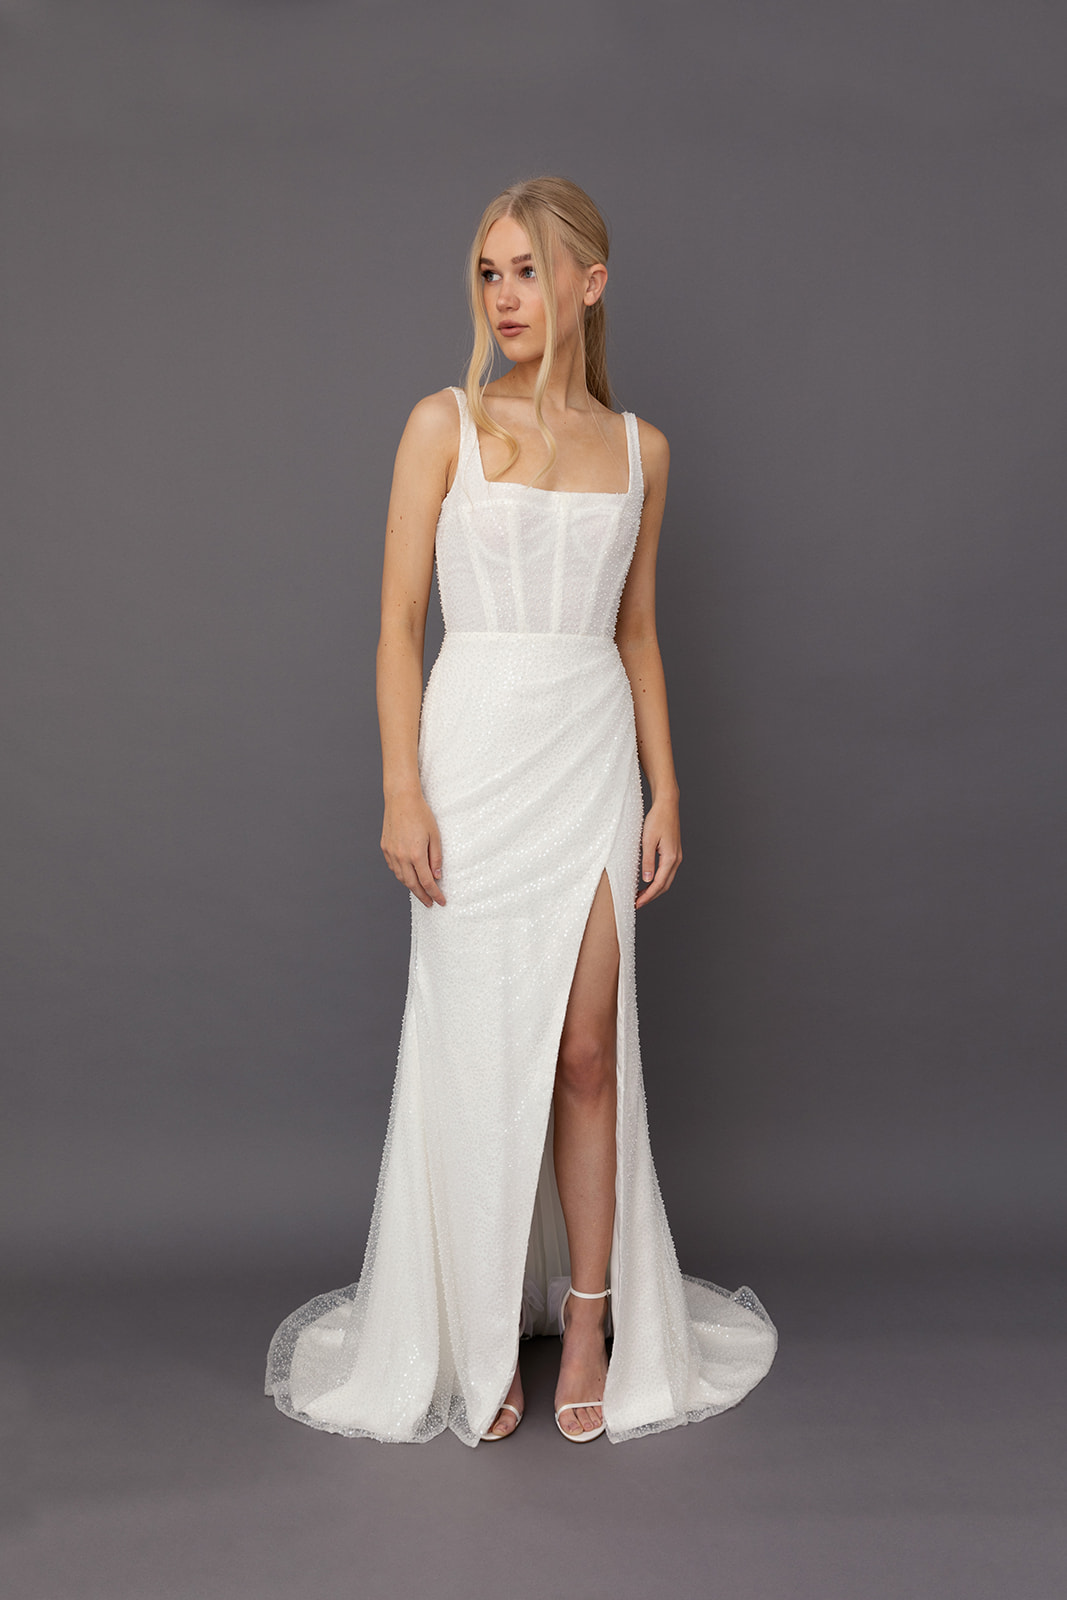 Banks Wedding Dress by Tara Lauren – fully beaded square neck fitted gown with boned corset bodice and draped faux wrap skirt with slit.